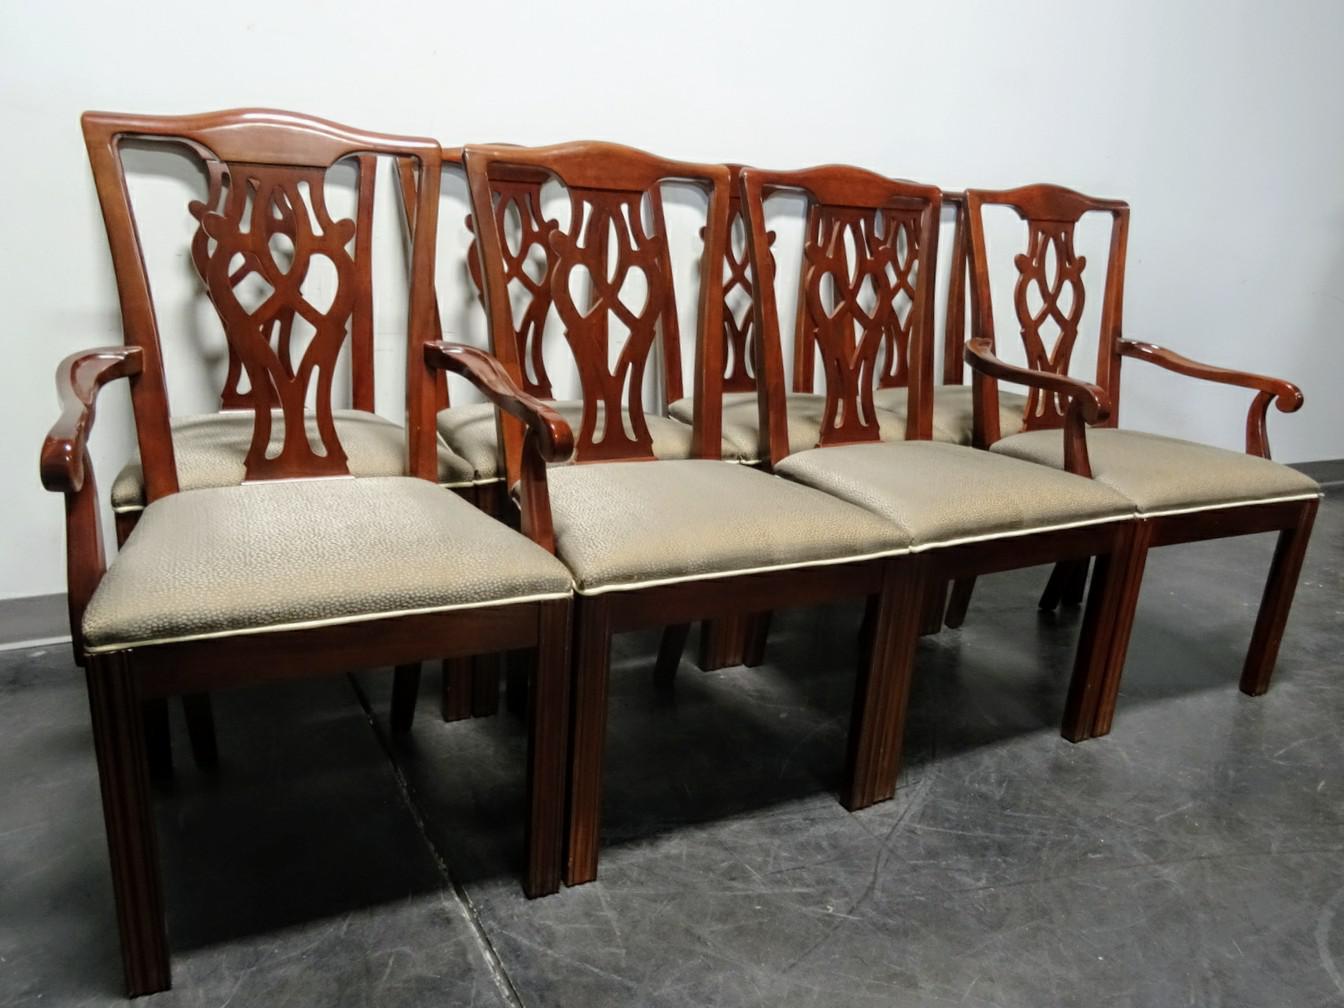 drexel-chippendale-straight-leg-mahogany-dining-chairs-set-of-8-6767.jpg